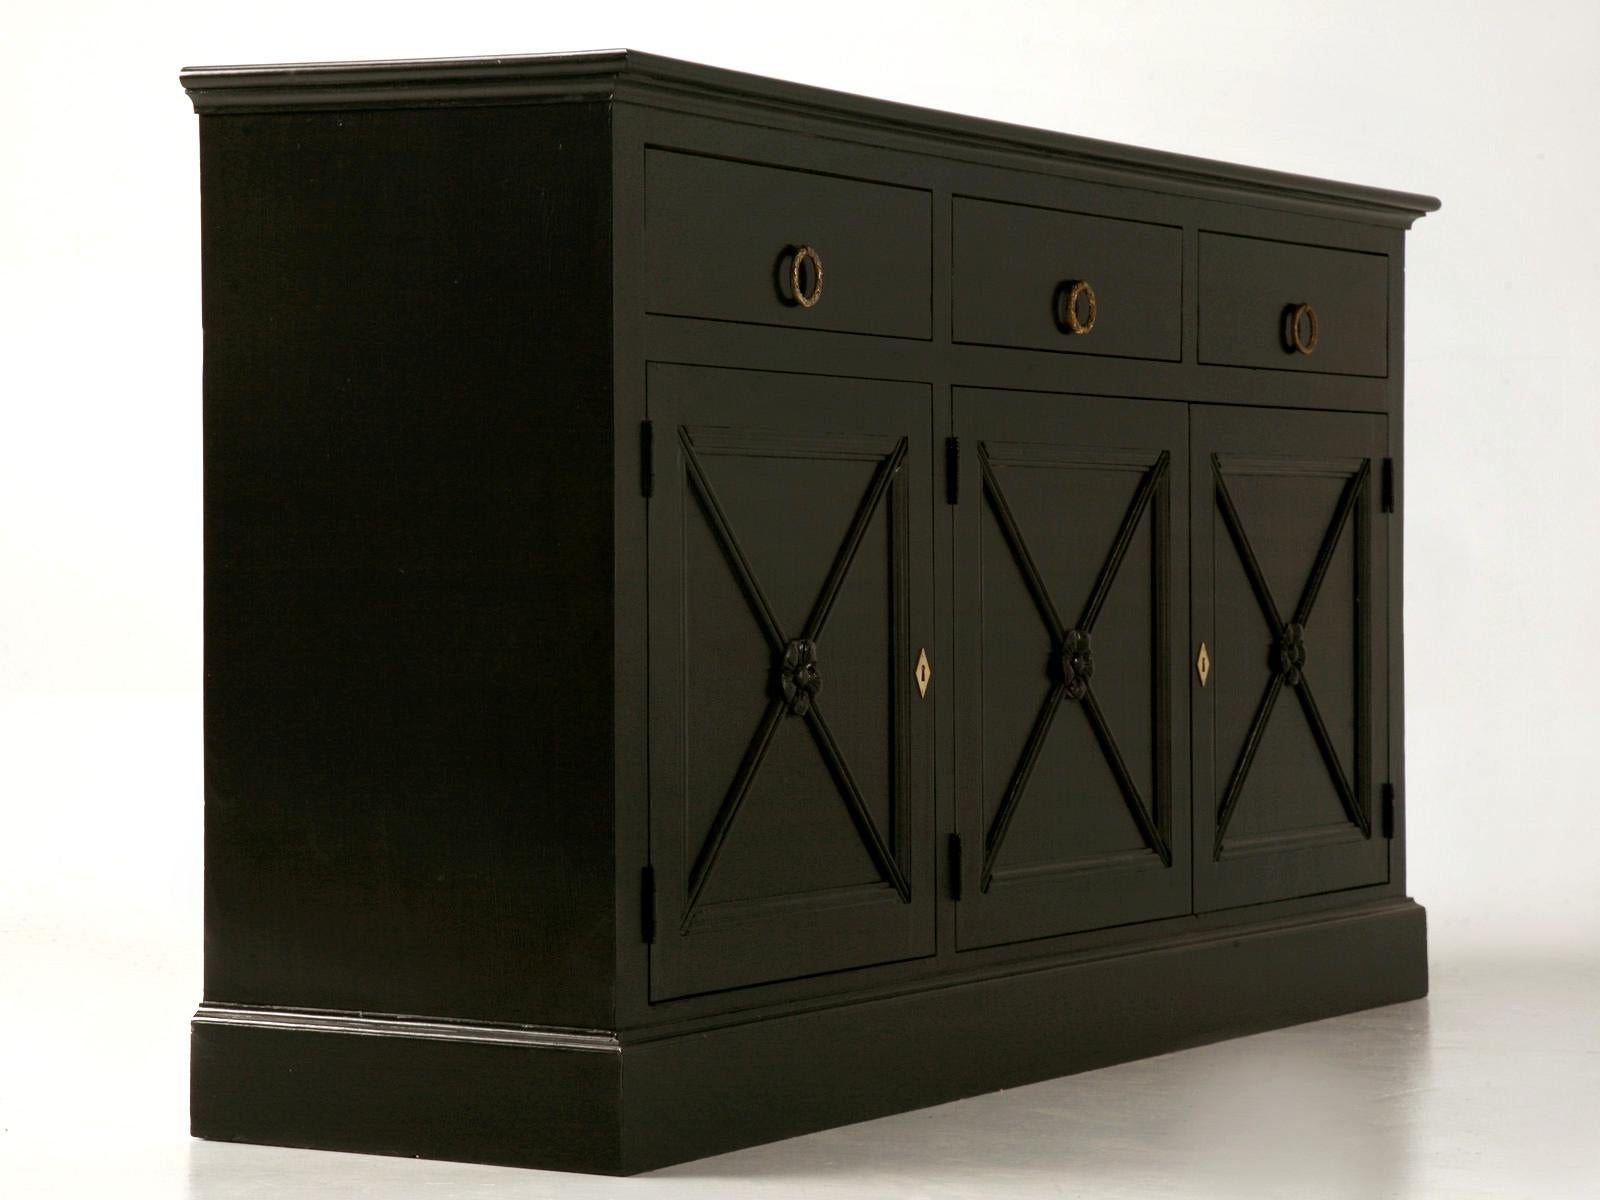 Jansen inspired handcrafted buffet in the French Directoire style. This Jansen inspired buffet is custom made in the Old Plank workshop and can be reproduced in any size and paint color. Make it your own! We are pleased to accommodate your design